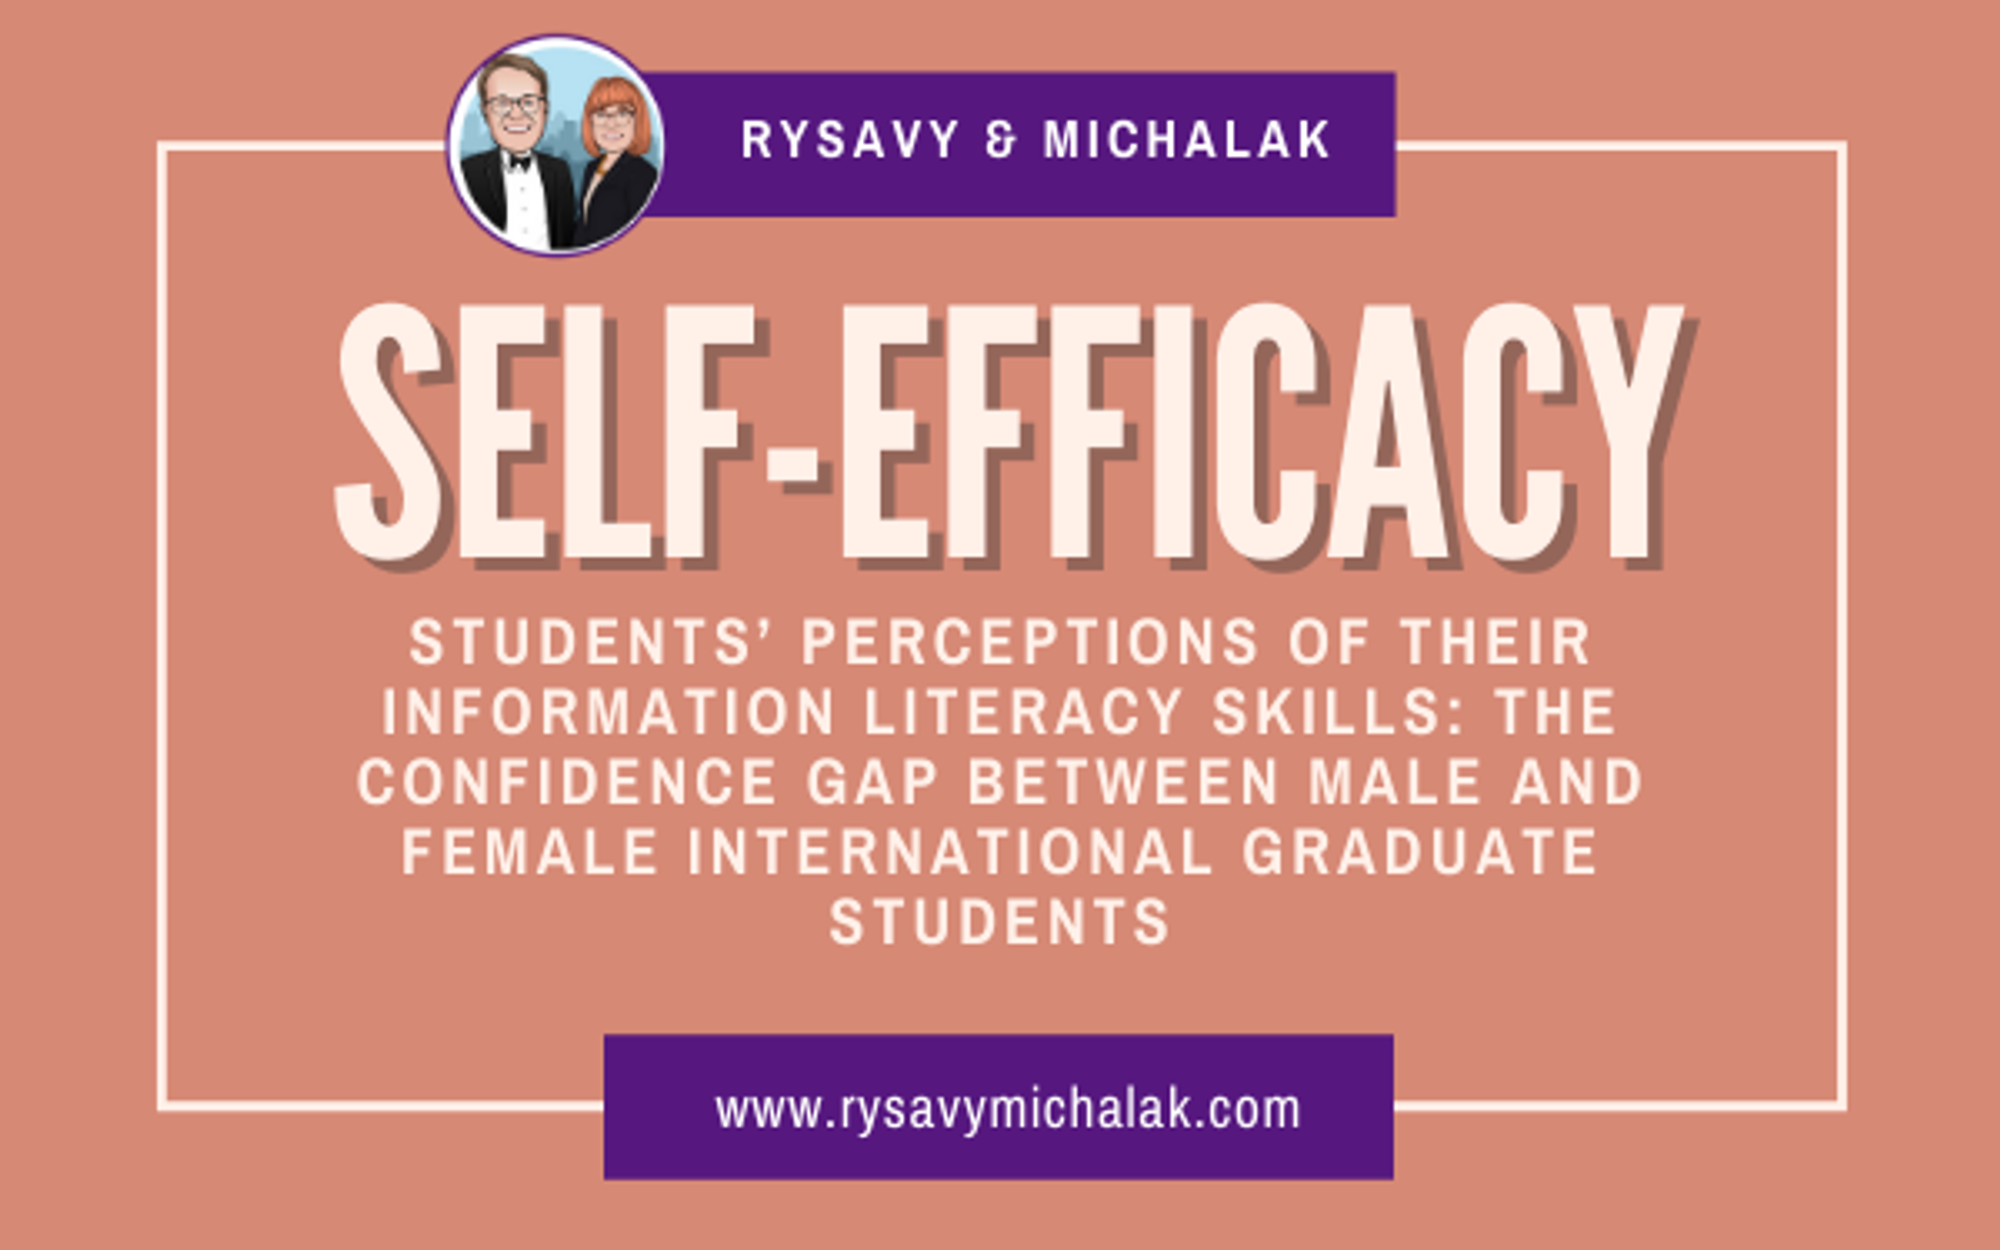 Students’ perceptions of their information literacy skills: the confidence gap between male and female international graduate students